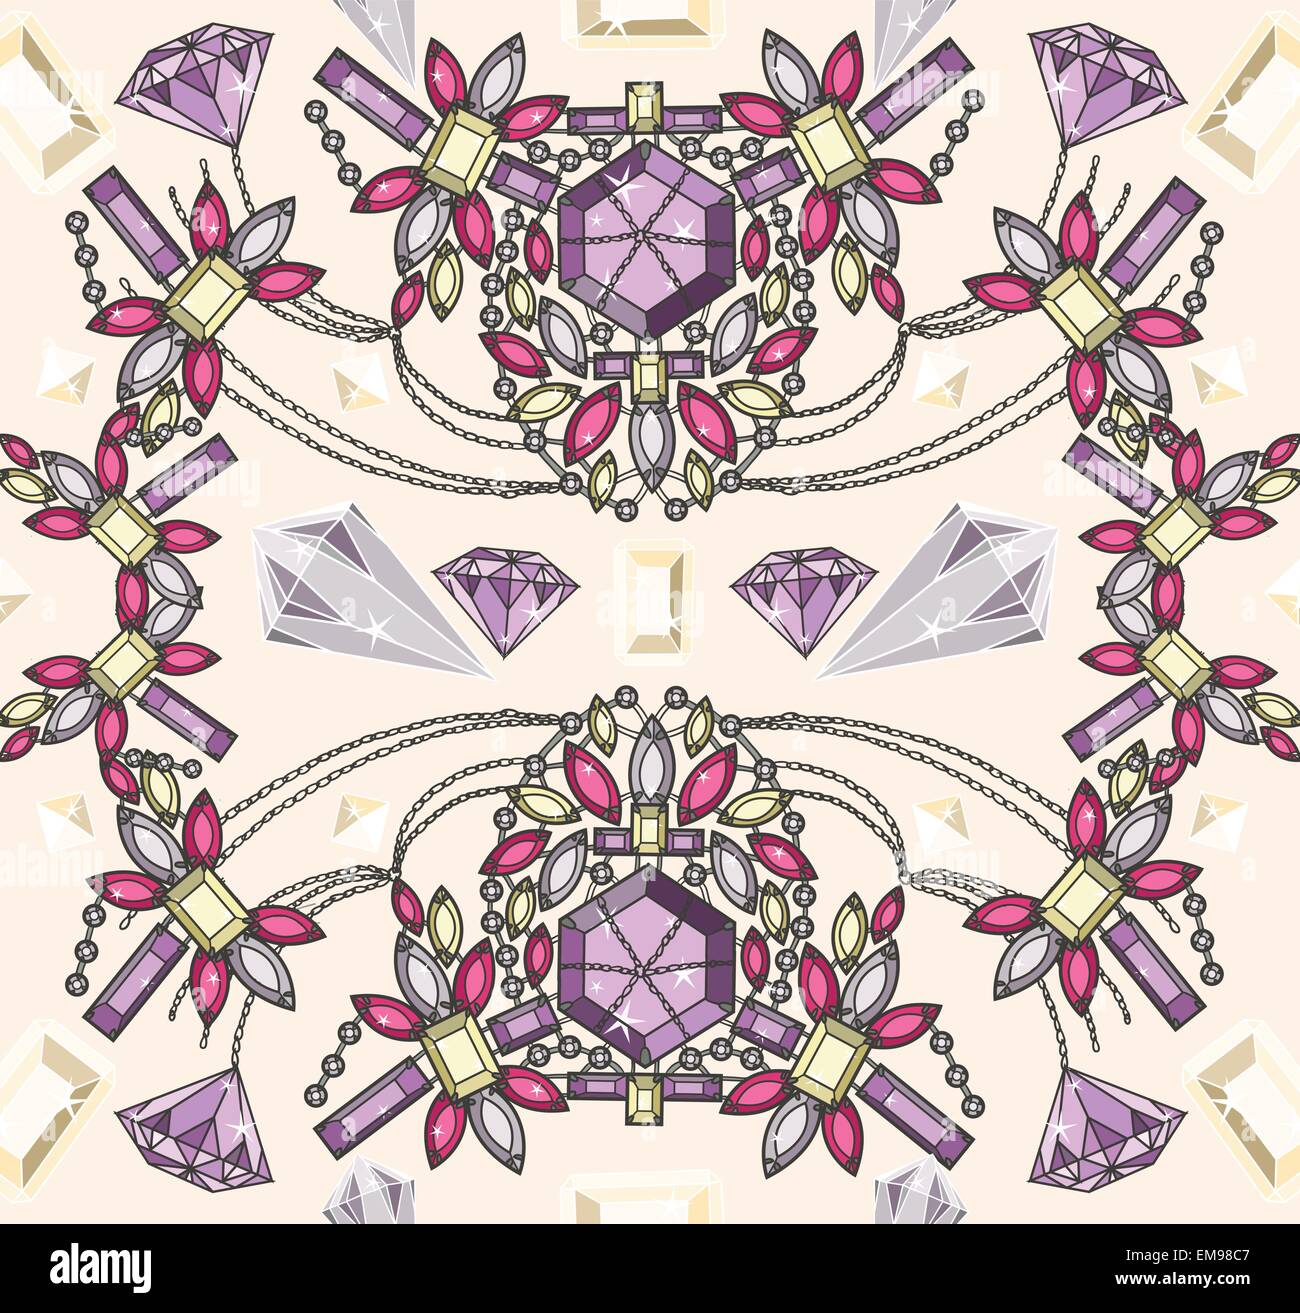 Seamless pastel jewelery necklace kaleidoscope pattern. Background with colorful gemstones and diamonds. Stock Vector